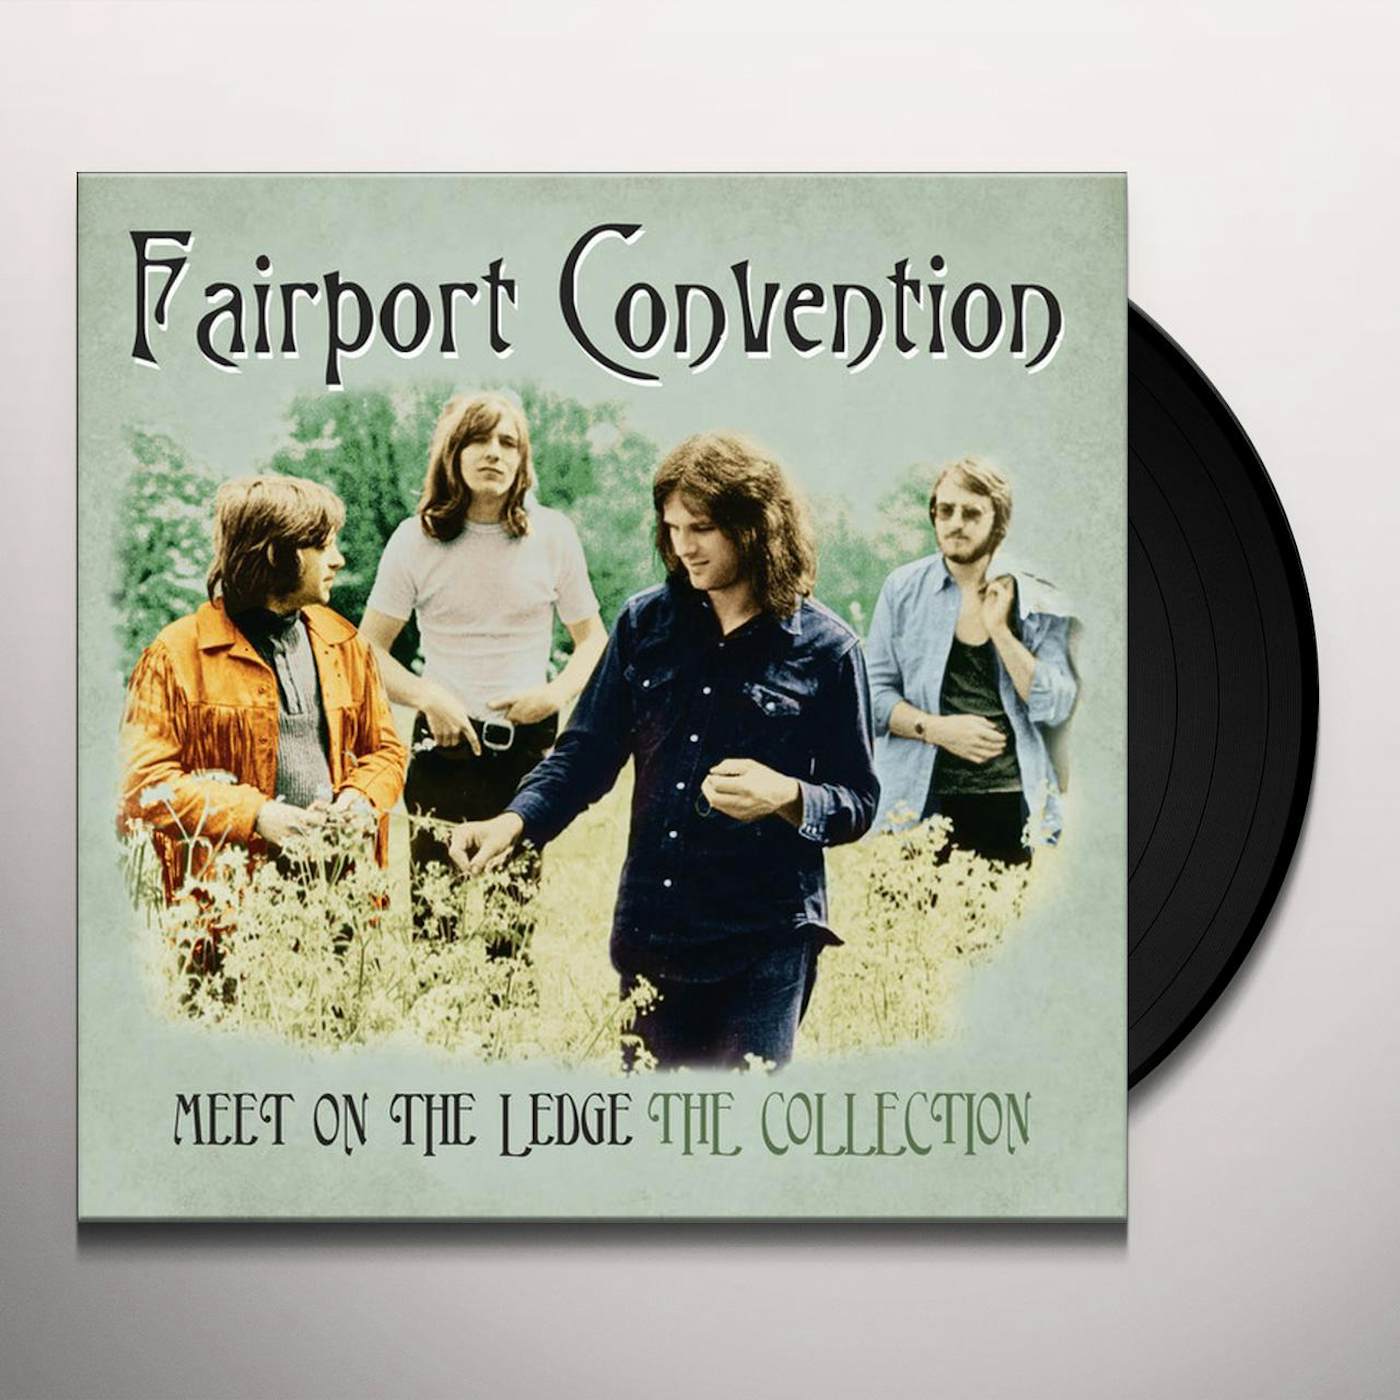 Fairport Convention MEET ME ON THE LEDGE: THE COLLECTION Vinyl Record